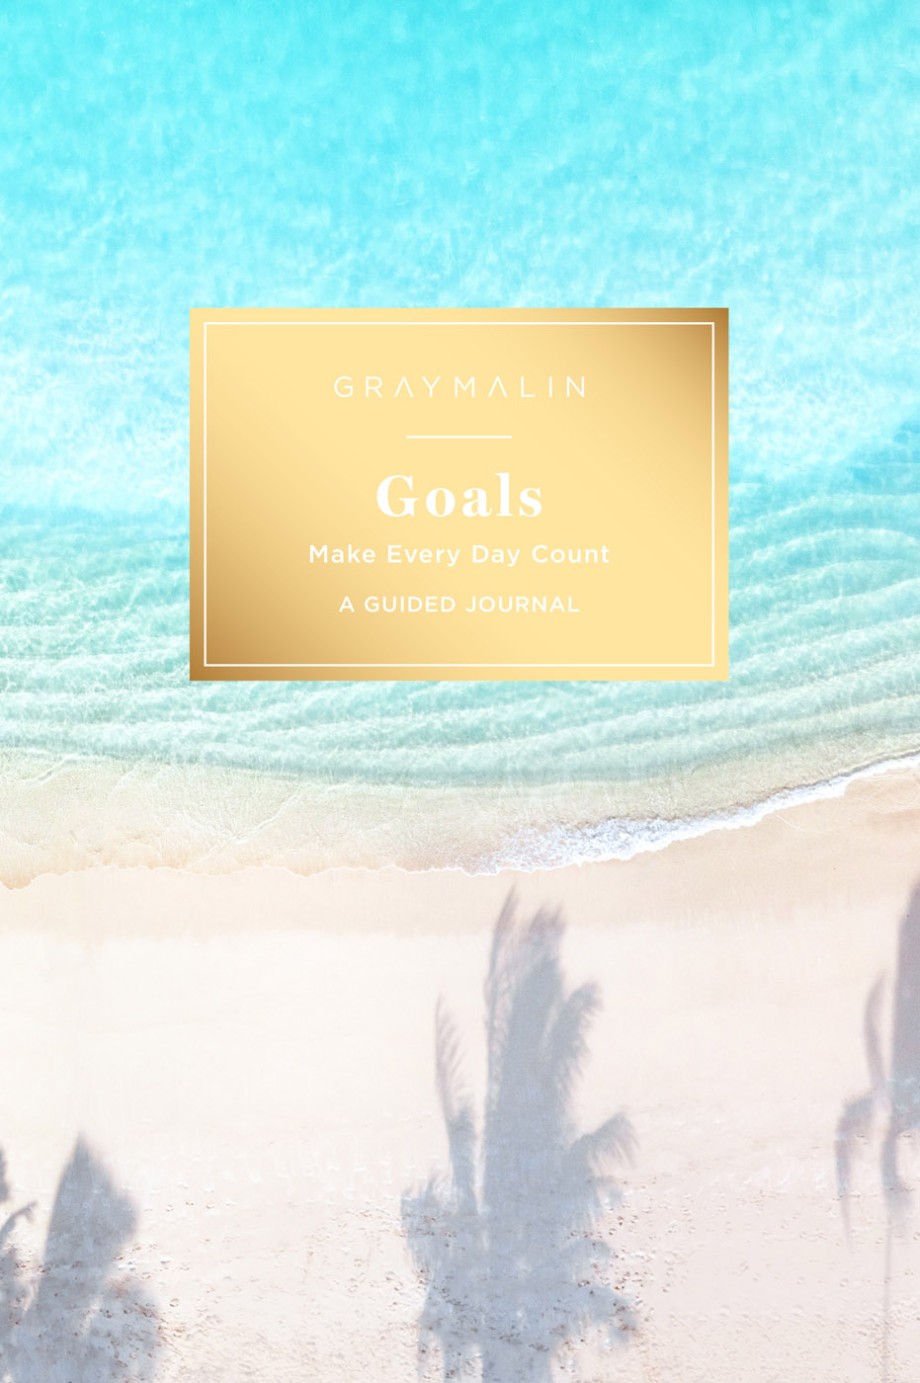 Gray Malin: Goals (Guided Journal) Make Every Day Count